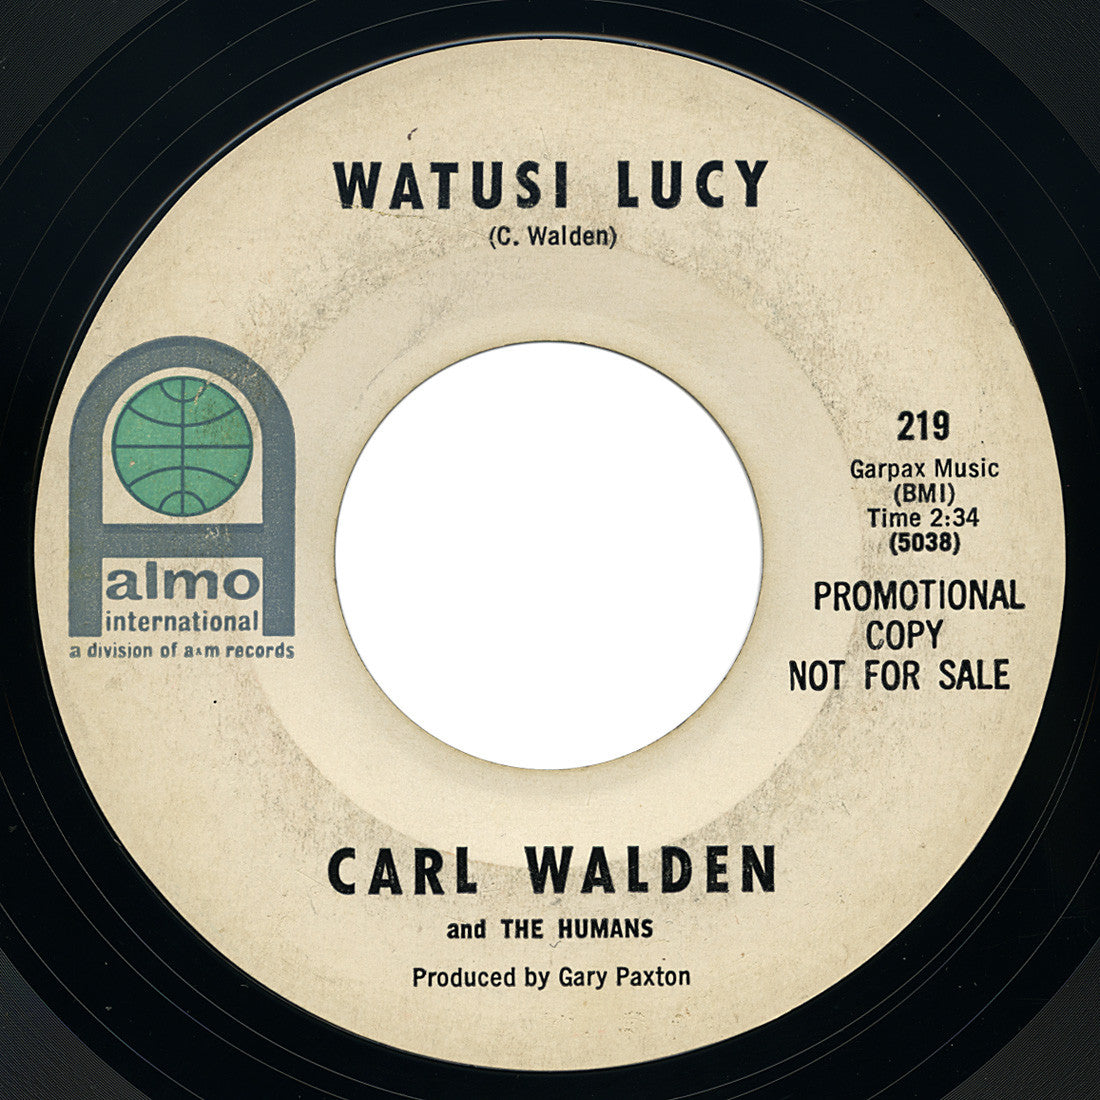 Carl Walden and The Humans – Watusi Lucy – Almo International